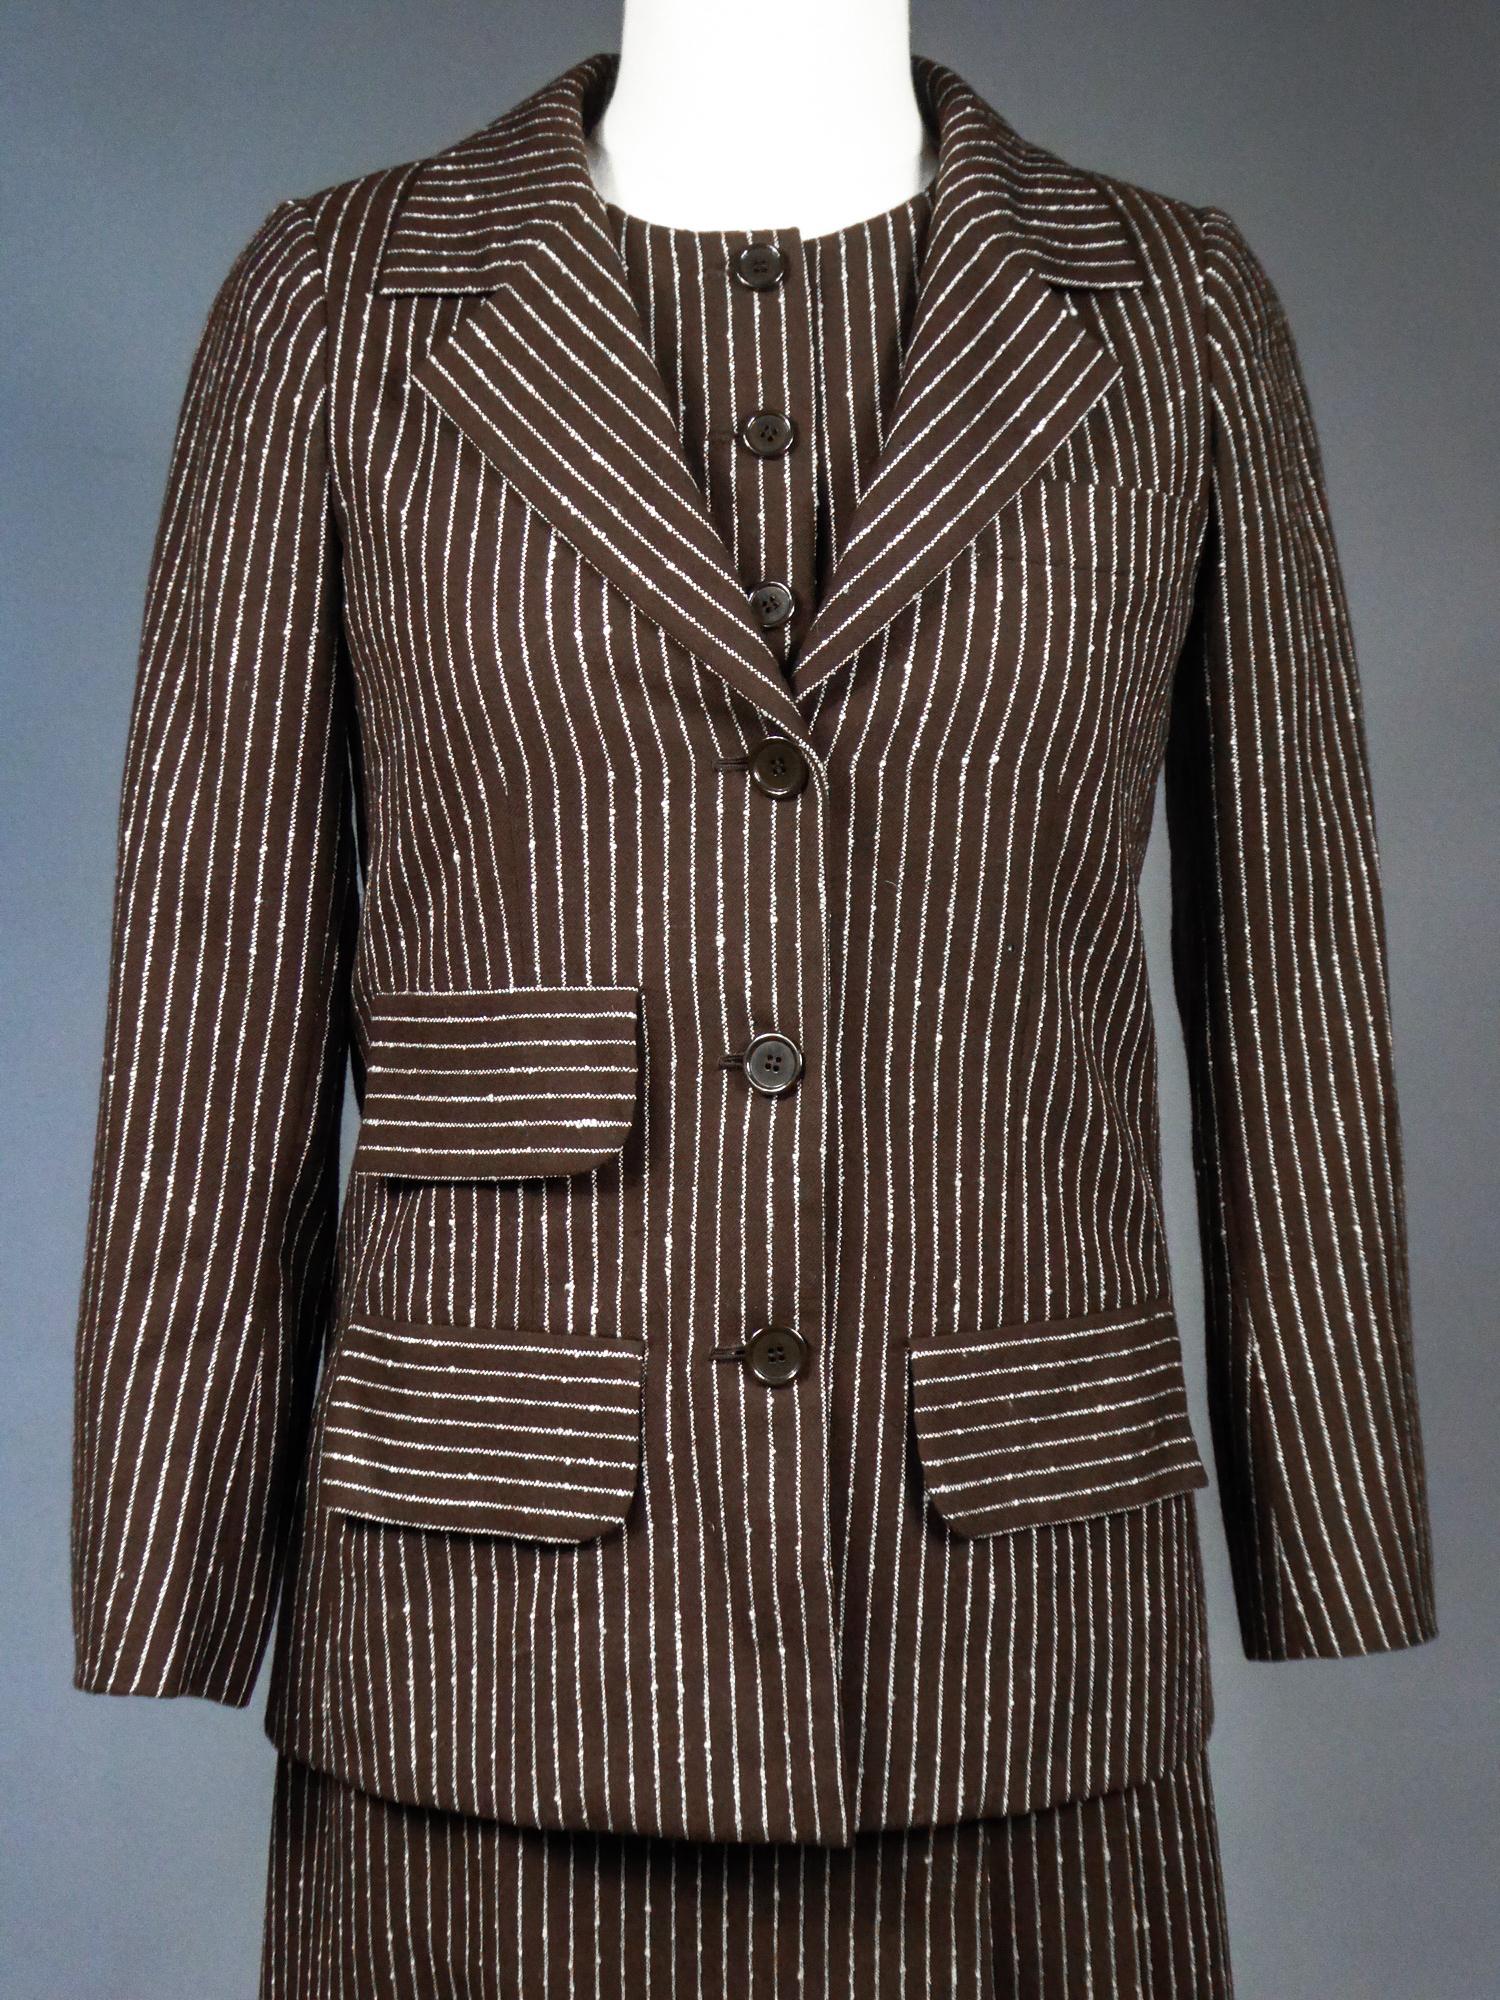 Women's Yves Saint Laurent Haute Couture skirt-suit numbered 14539 Circa 1967/1970 For Sale